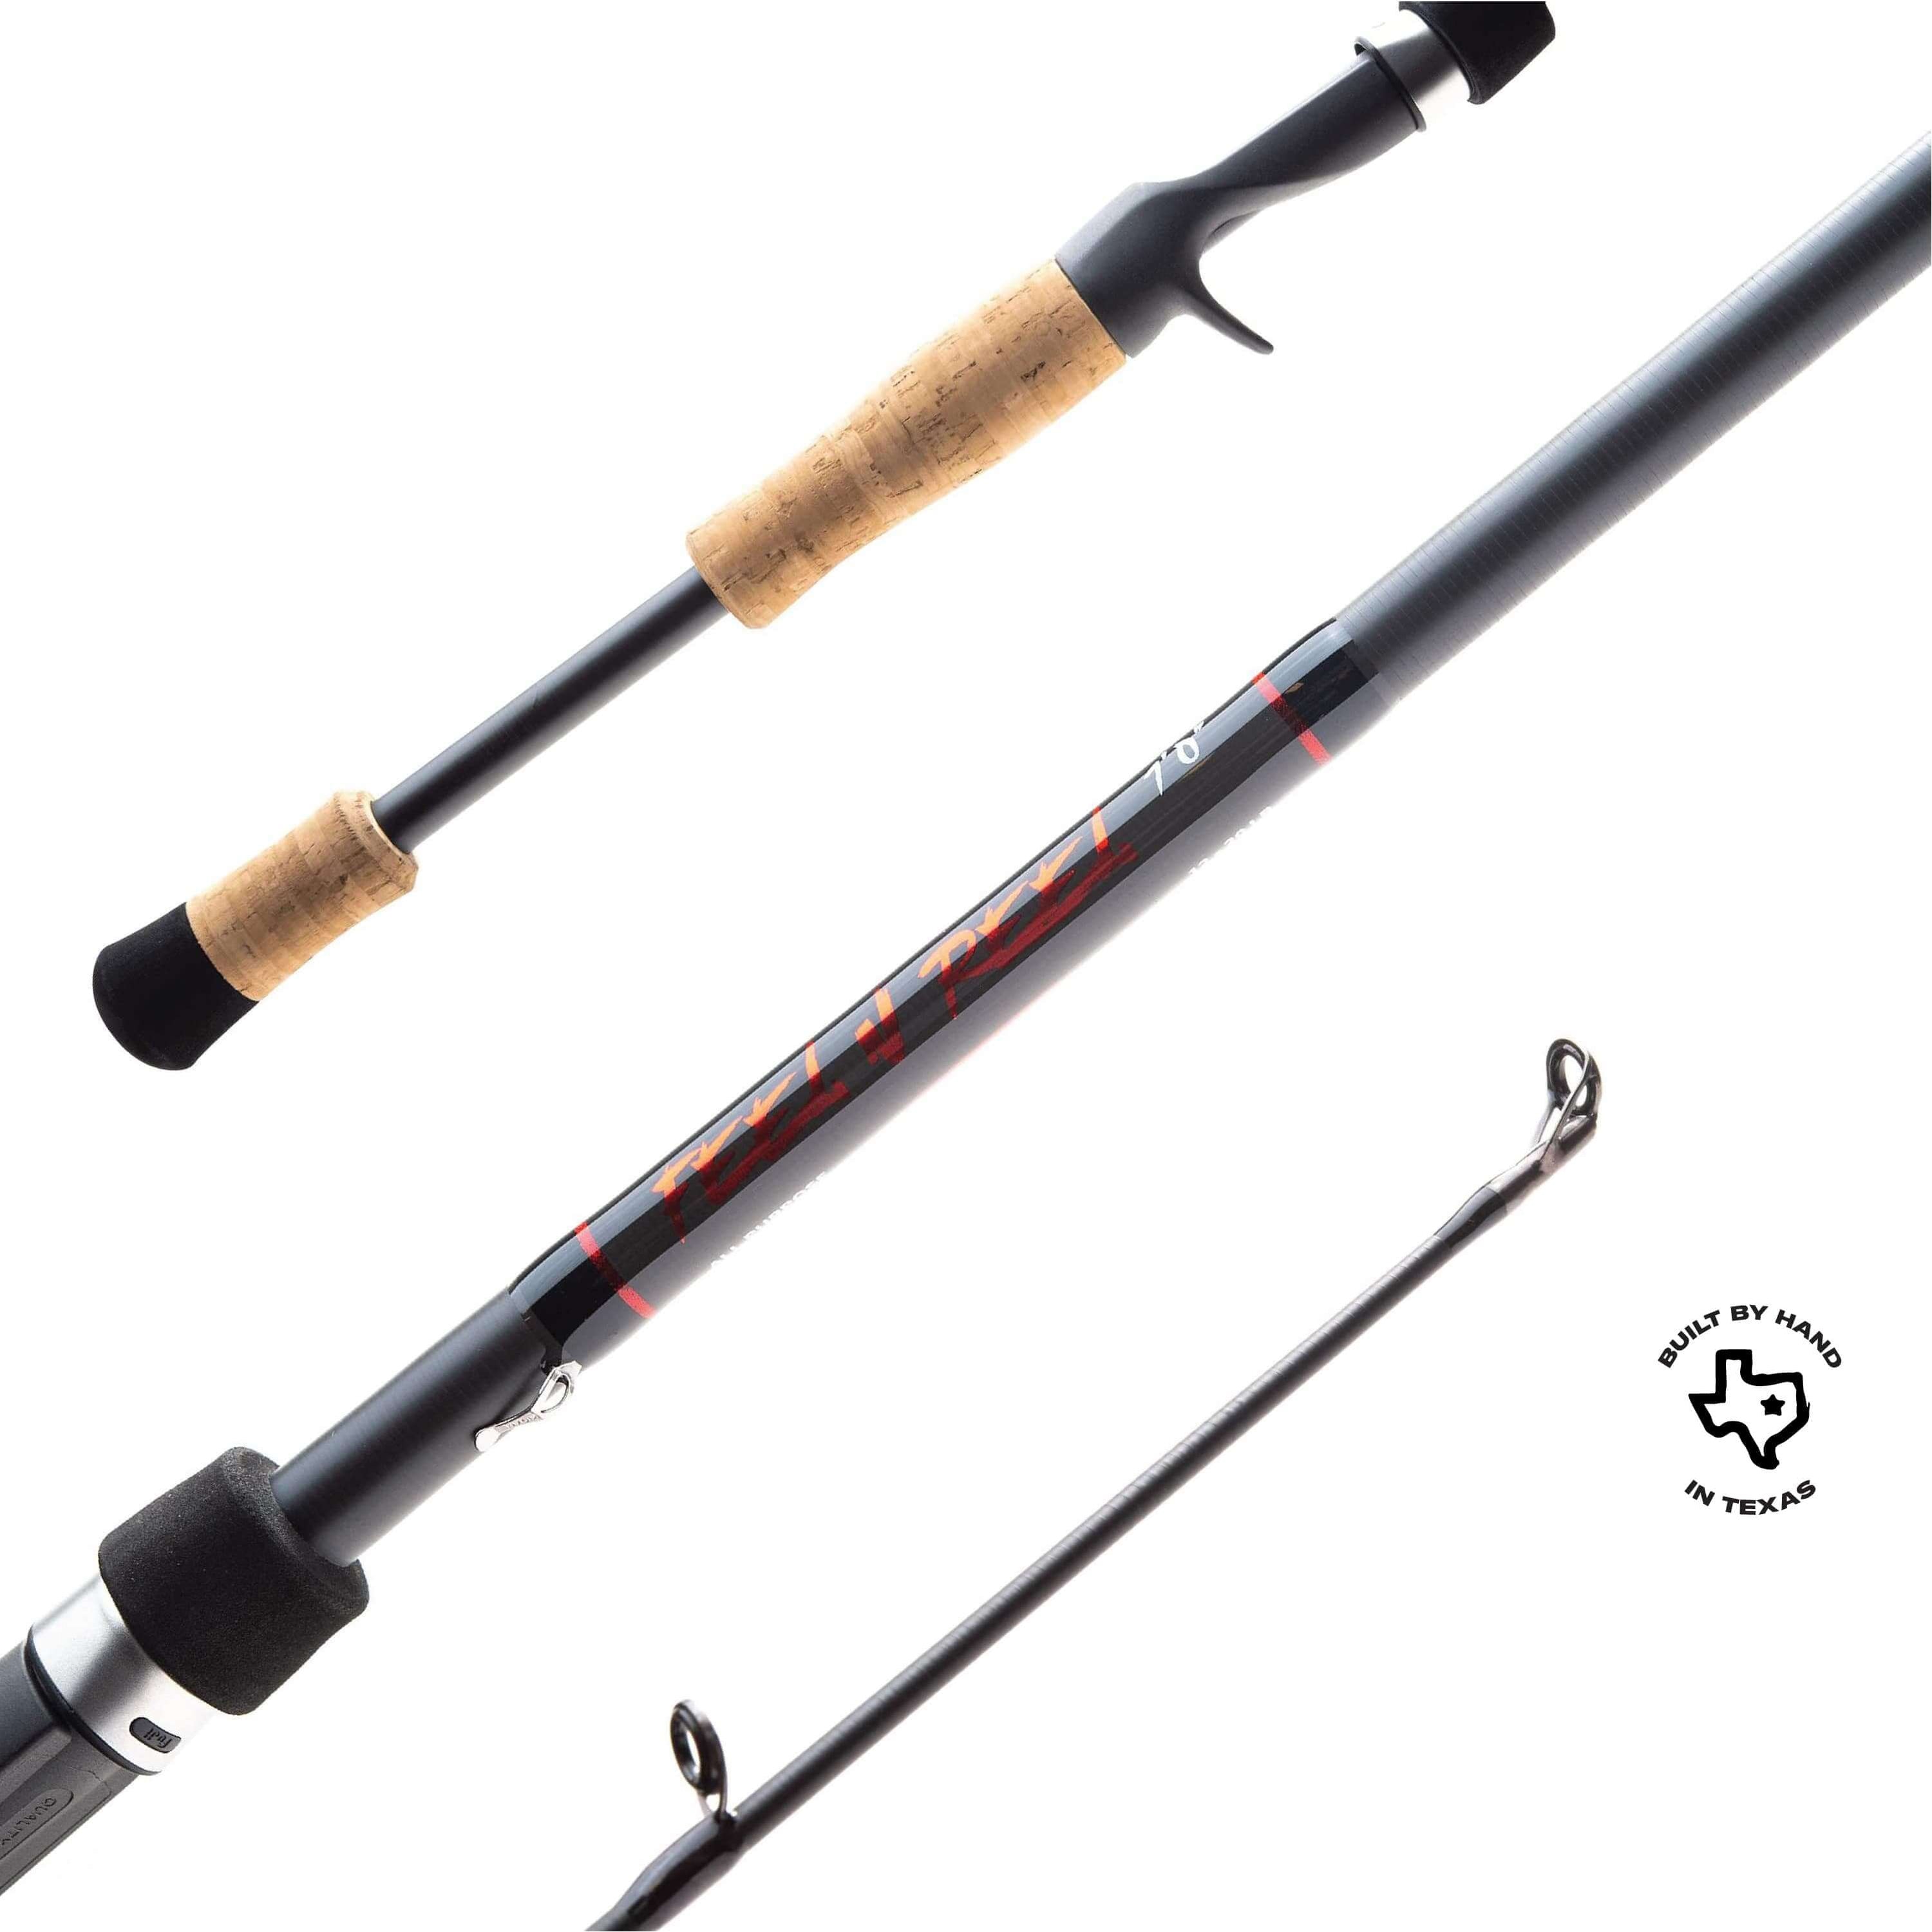 Shop Secondhand Fishing Rell And Rod with great discounts and